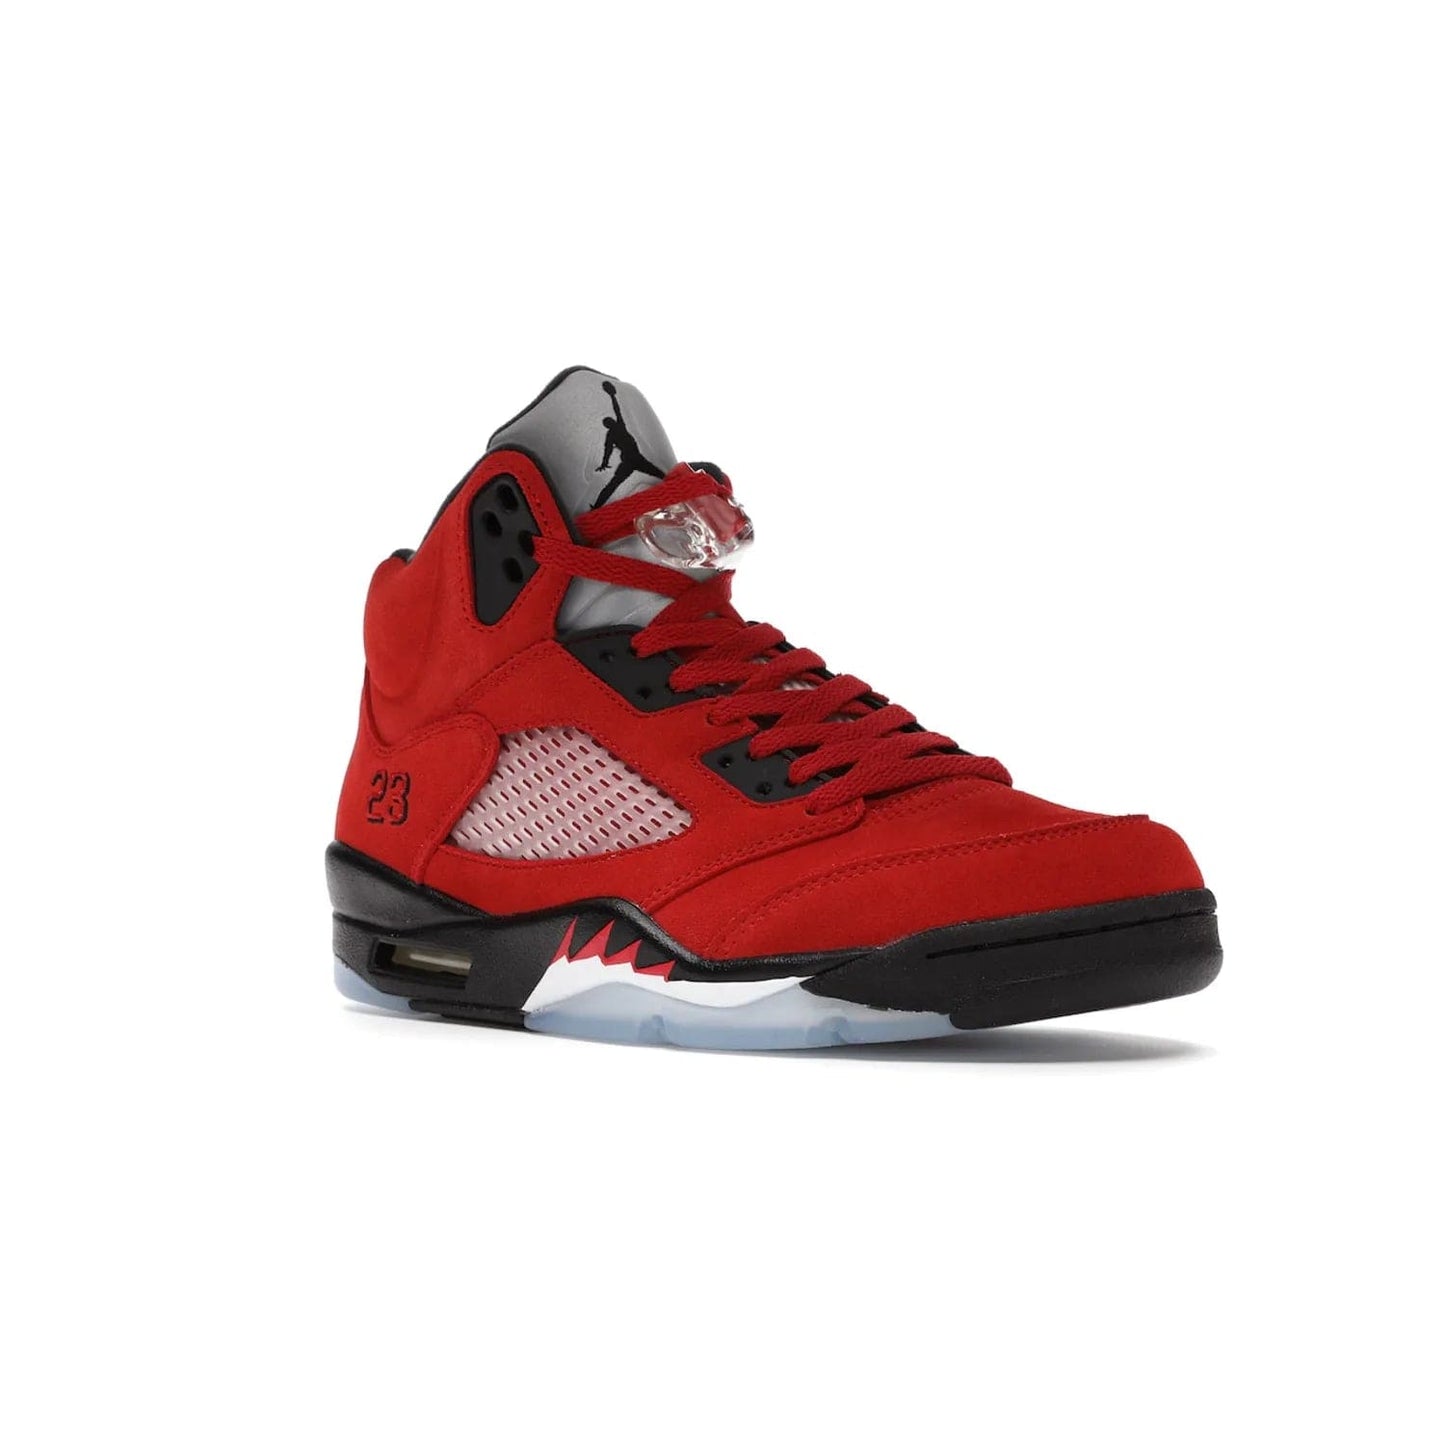 Jordan 5 Retro Raging Bull Red (2021) - Image 5 - Only at www.BallersClubKickz.com - Get ready for the 2021 stand-alone release of the Air Jordan 5 Raging Bulls! This all-suede upper combines luxe details like a Jumpman logo, red & black "23" embroidery and shark tooth detailing, atop a black midsole. Don't miss out - release date in April 2021 for $190.